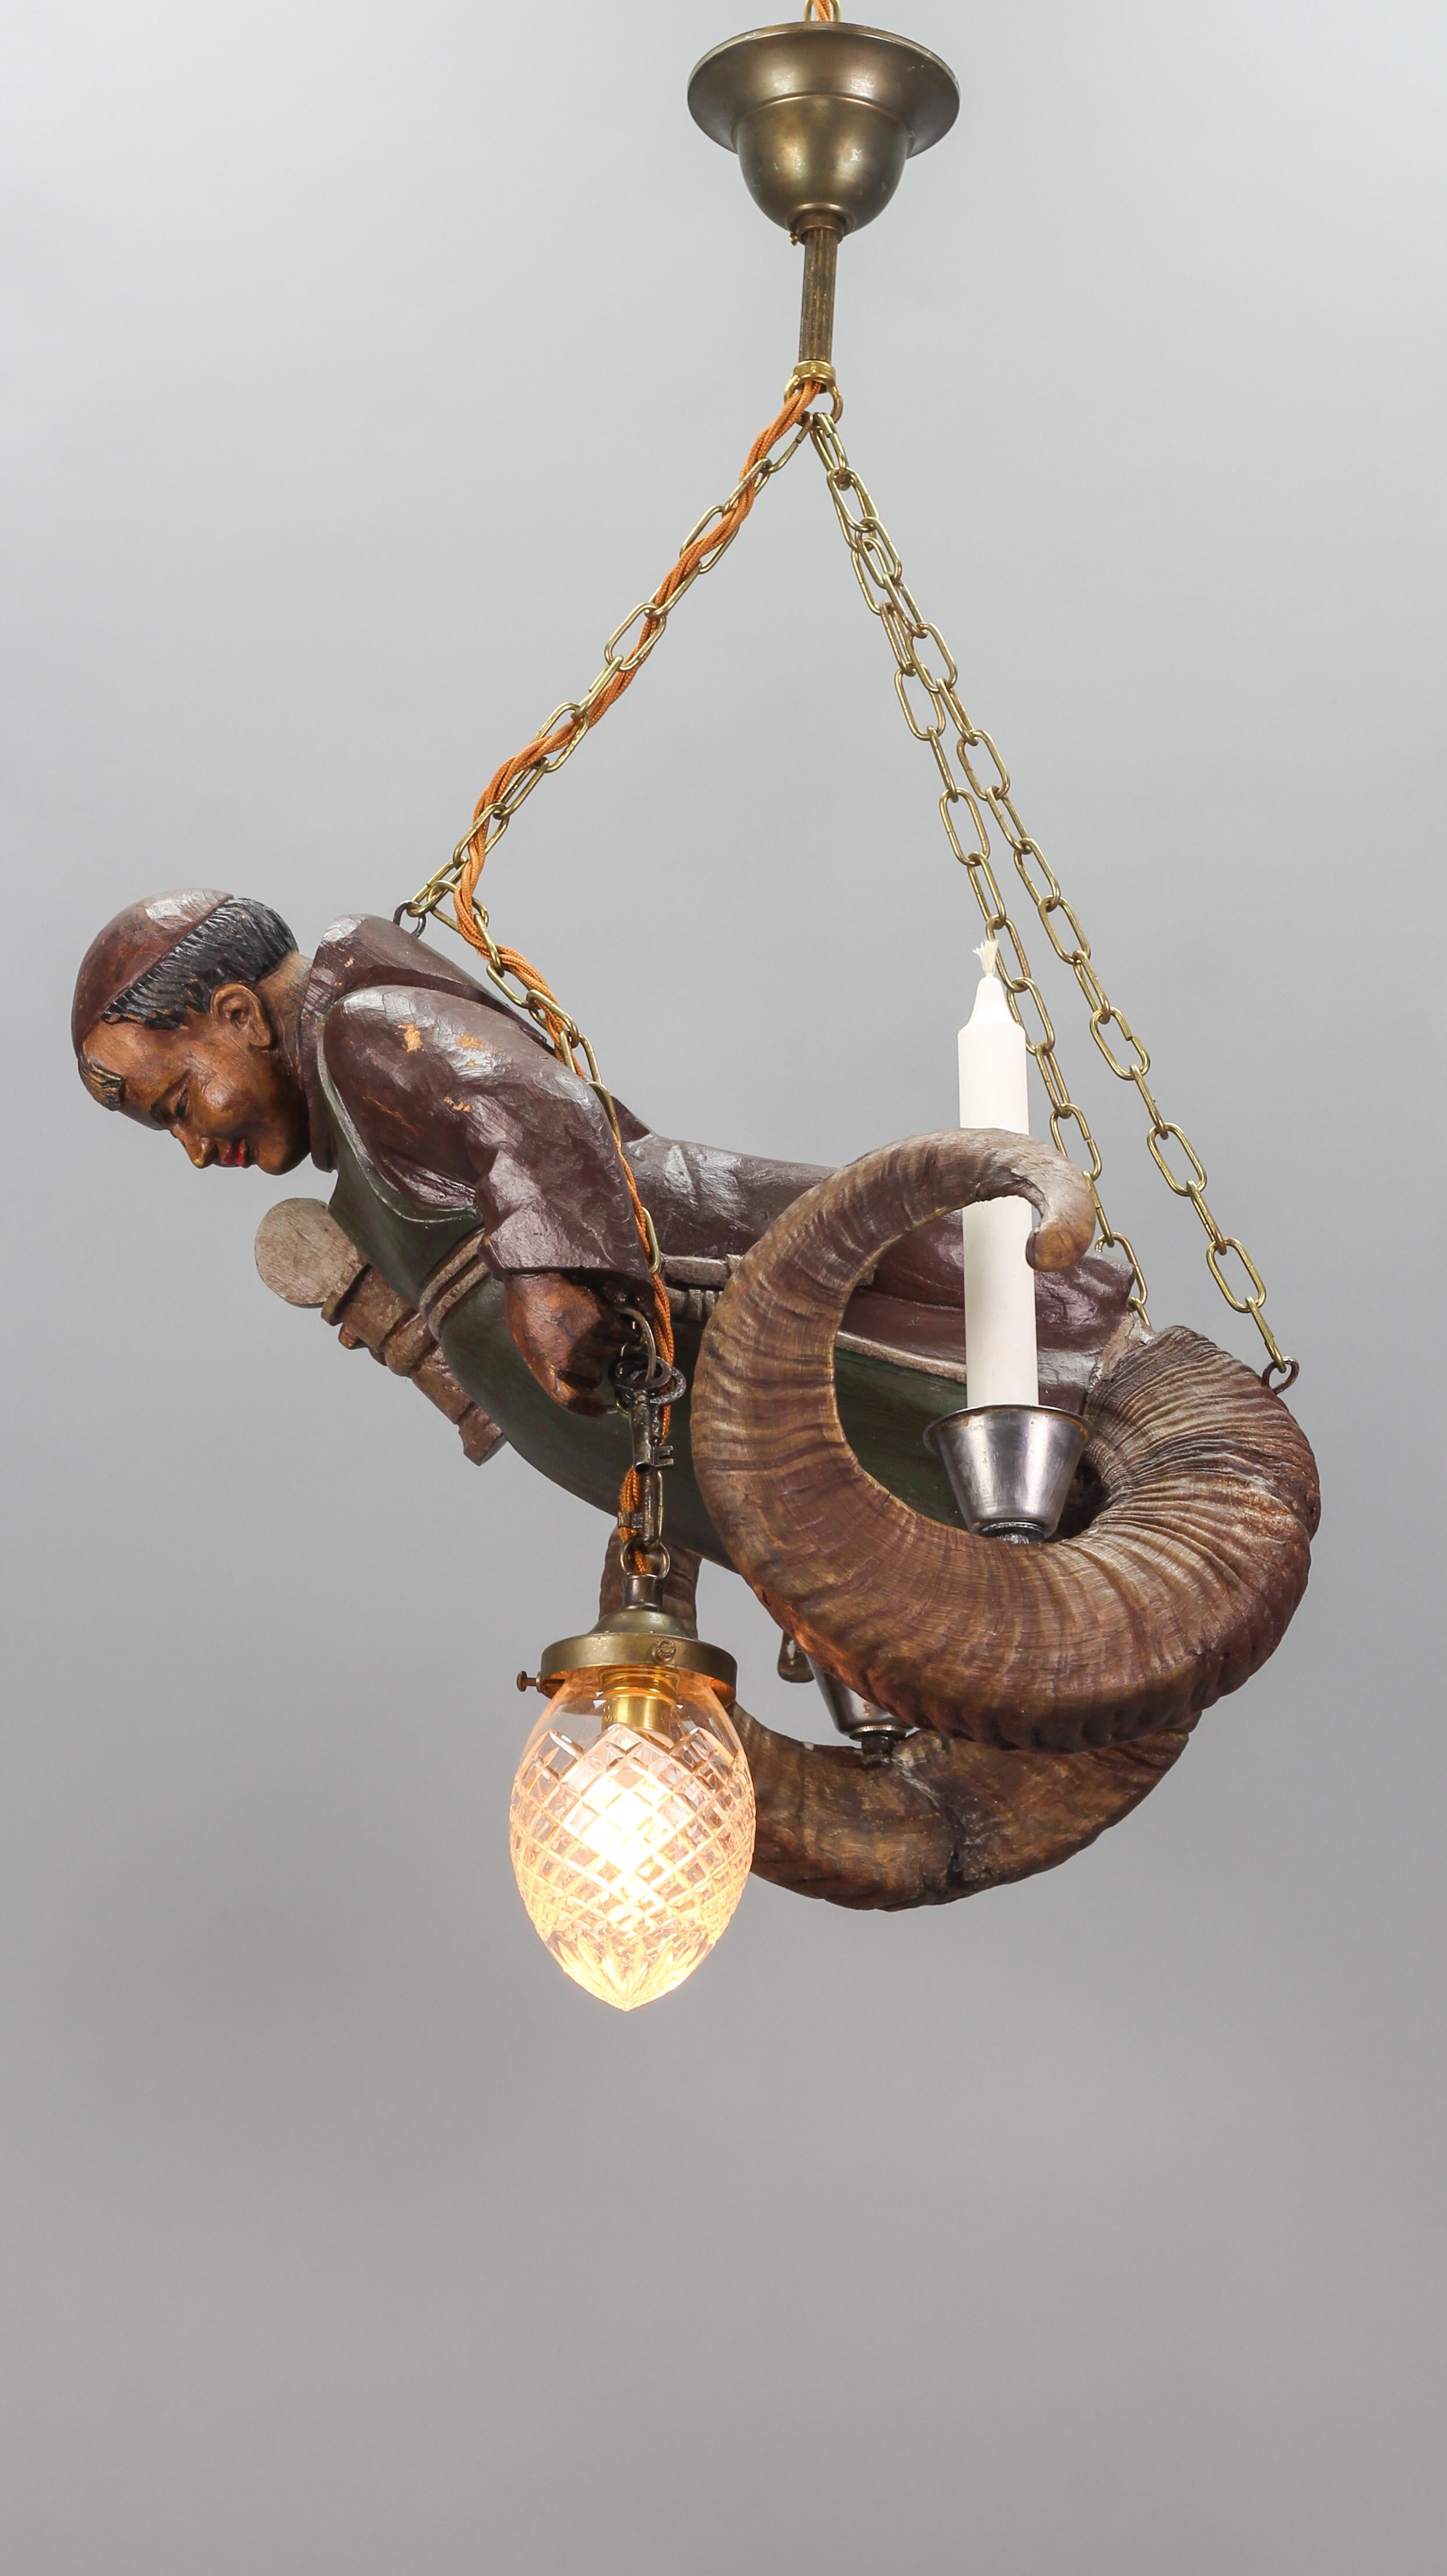 Early 20th Century Hand-Carved Wooden Pendant Light Lustermandl with Cellar Master Figure, ca. 1920